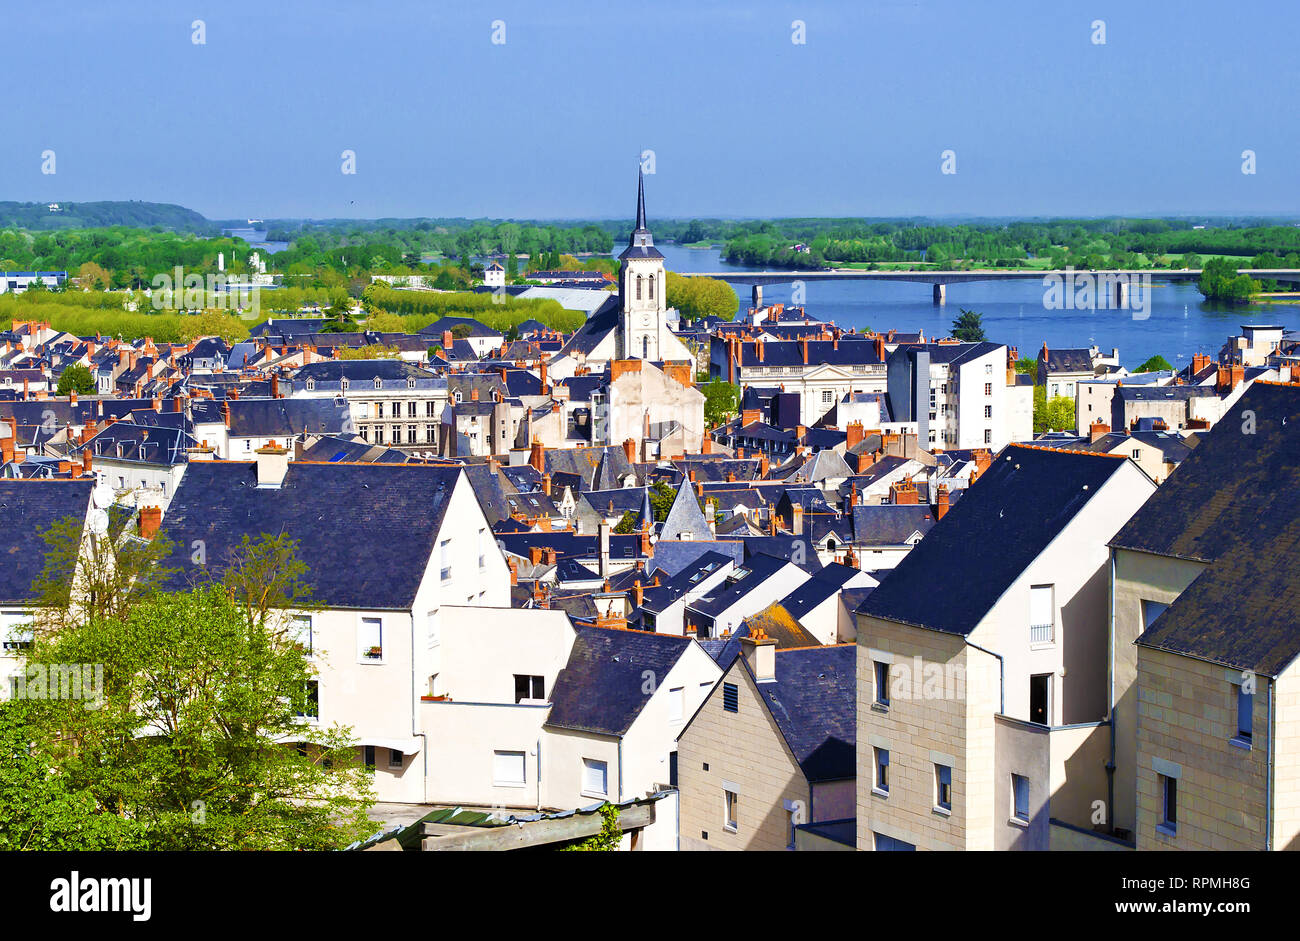 Breathtaking view on amazing small town Saumur, France. Many white and gray houses near a Loire river, arched bridge, lots of green trees and rooftops Stock Photo